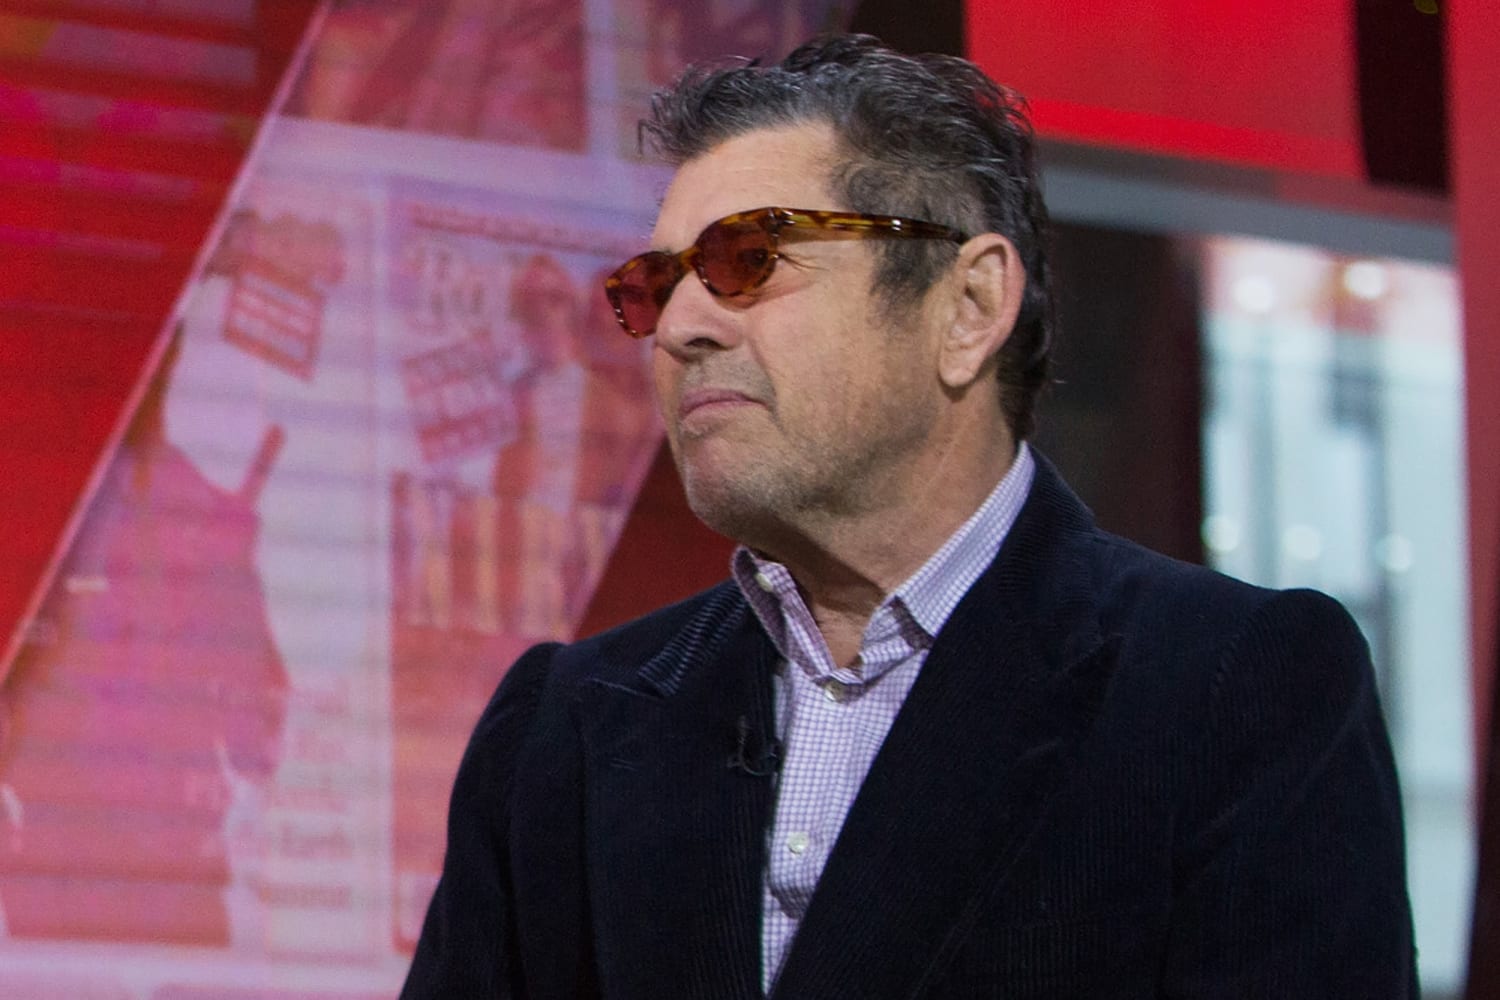 Jann Wenner removed from Rock & Roll Hall of Fame board after interview